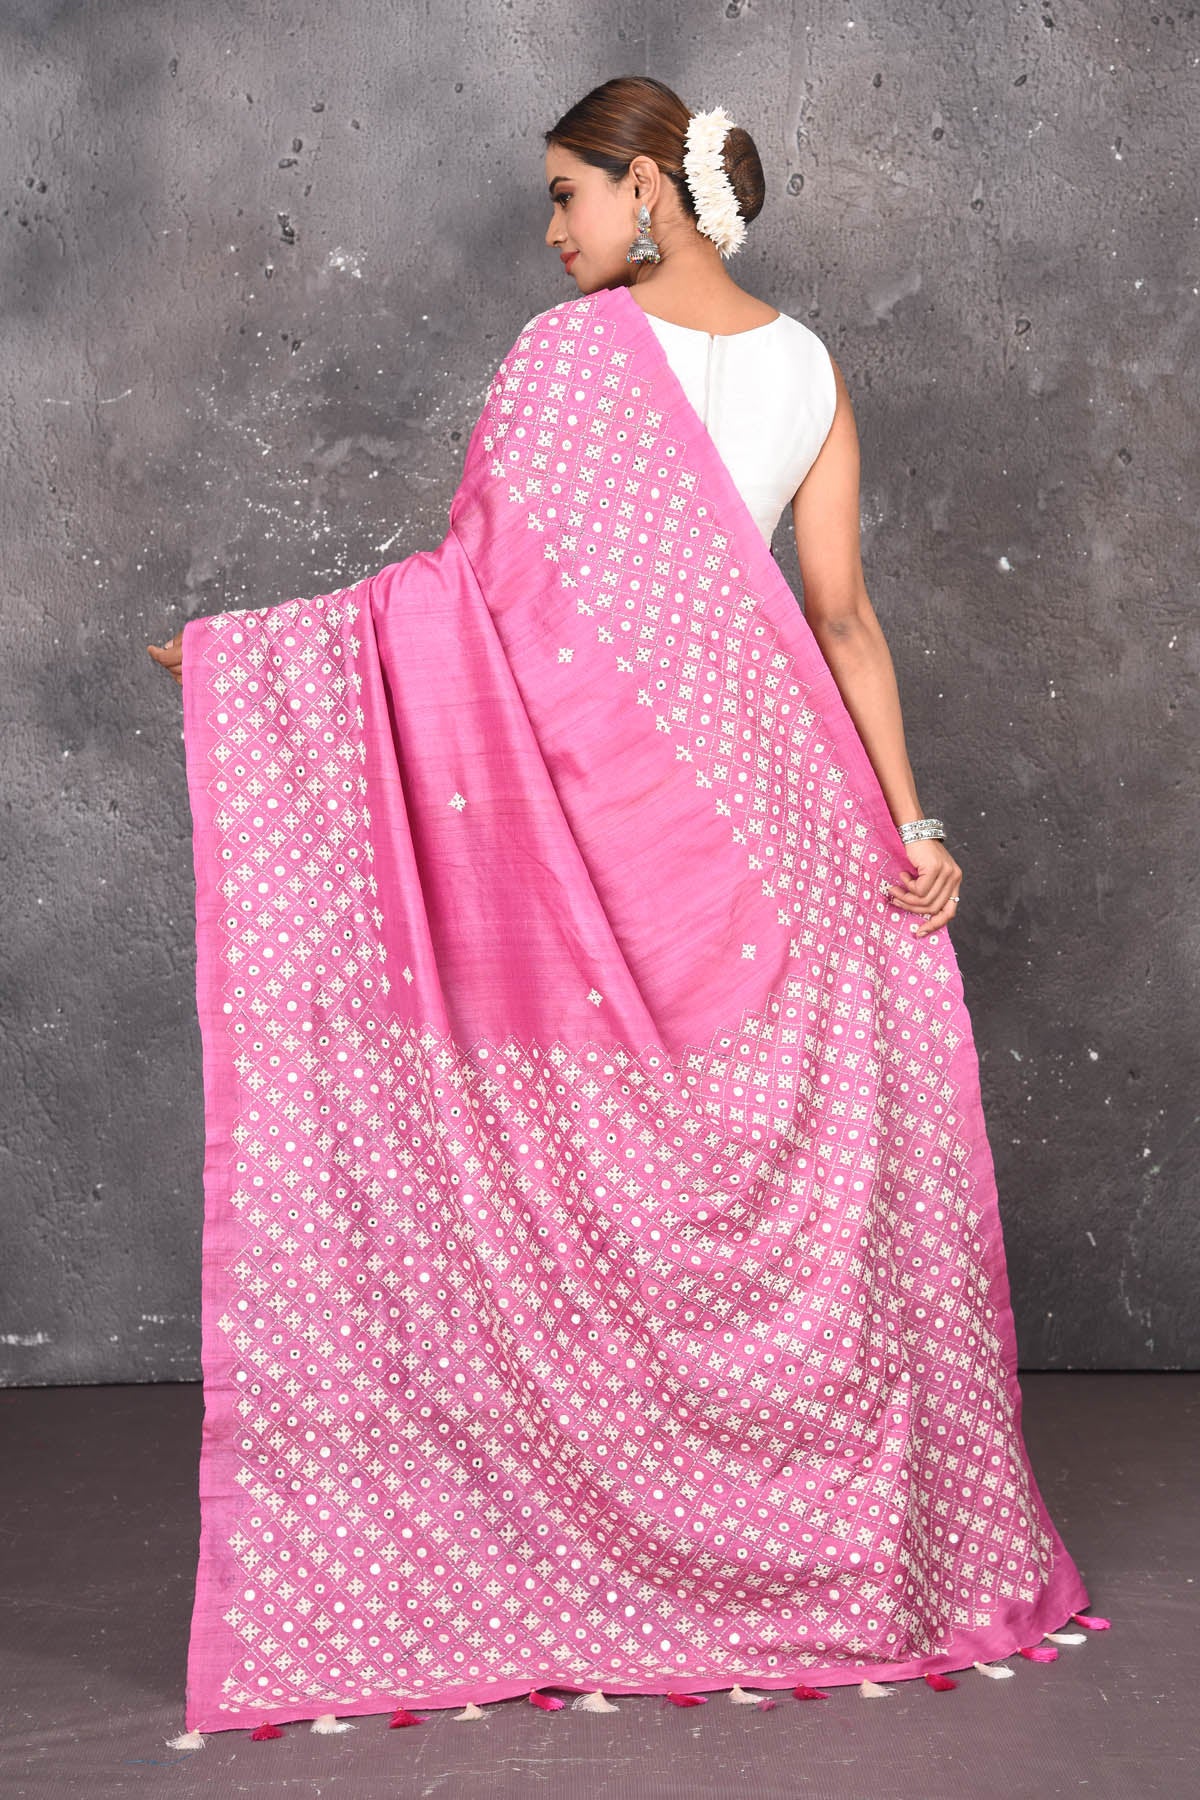 Shop elegant red zari woven pure tussar gicha silk saree in pink color with beautiful mirrorwork online in USA which has crafted by skilled weaver of Banaras with elegance and grace, this saree is definitely the epitome of beauty and a must have in your collection. Buy designer handwoven sarees from Pure Elegance which brings you our latest collection of Bhagalpuri handwoven tussar silk sarees.-Back view with open pallu.